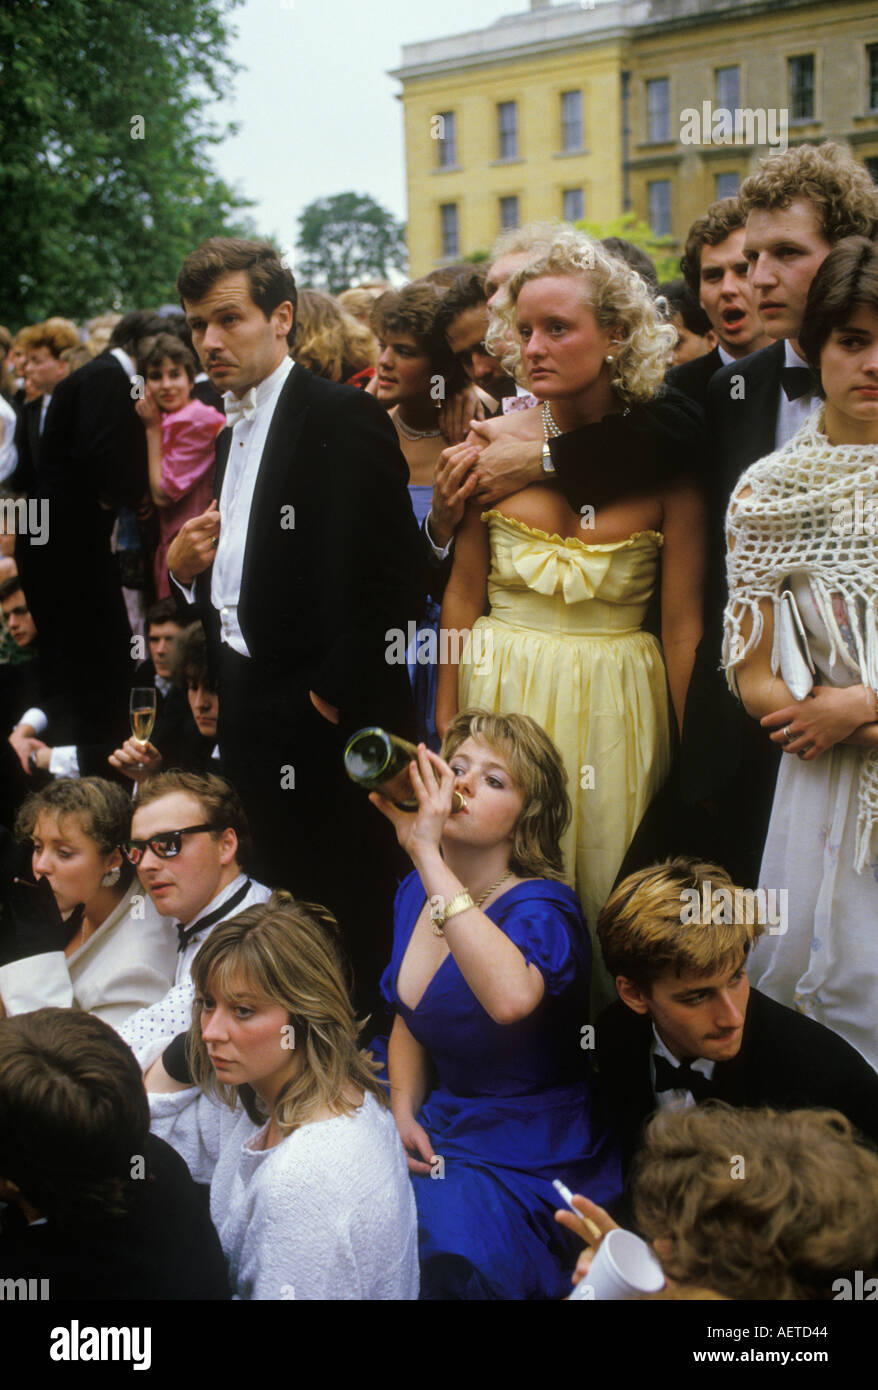 Survivors photograph University students at Magdalen College Oxford University end of year May Ball 1980s UK HOMER SYKES Stock Photo